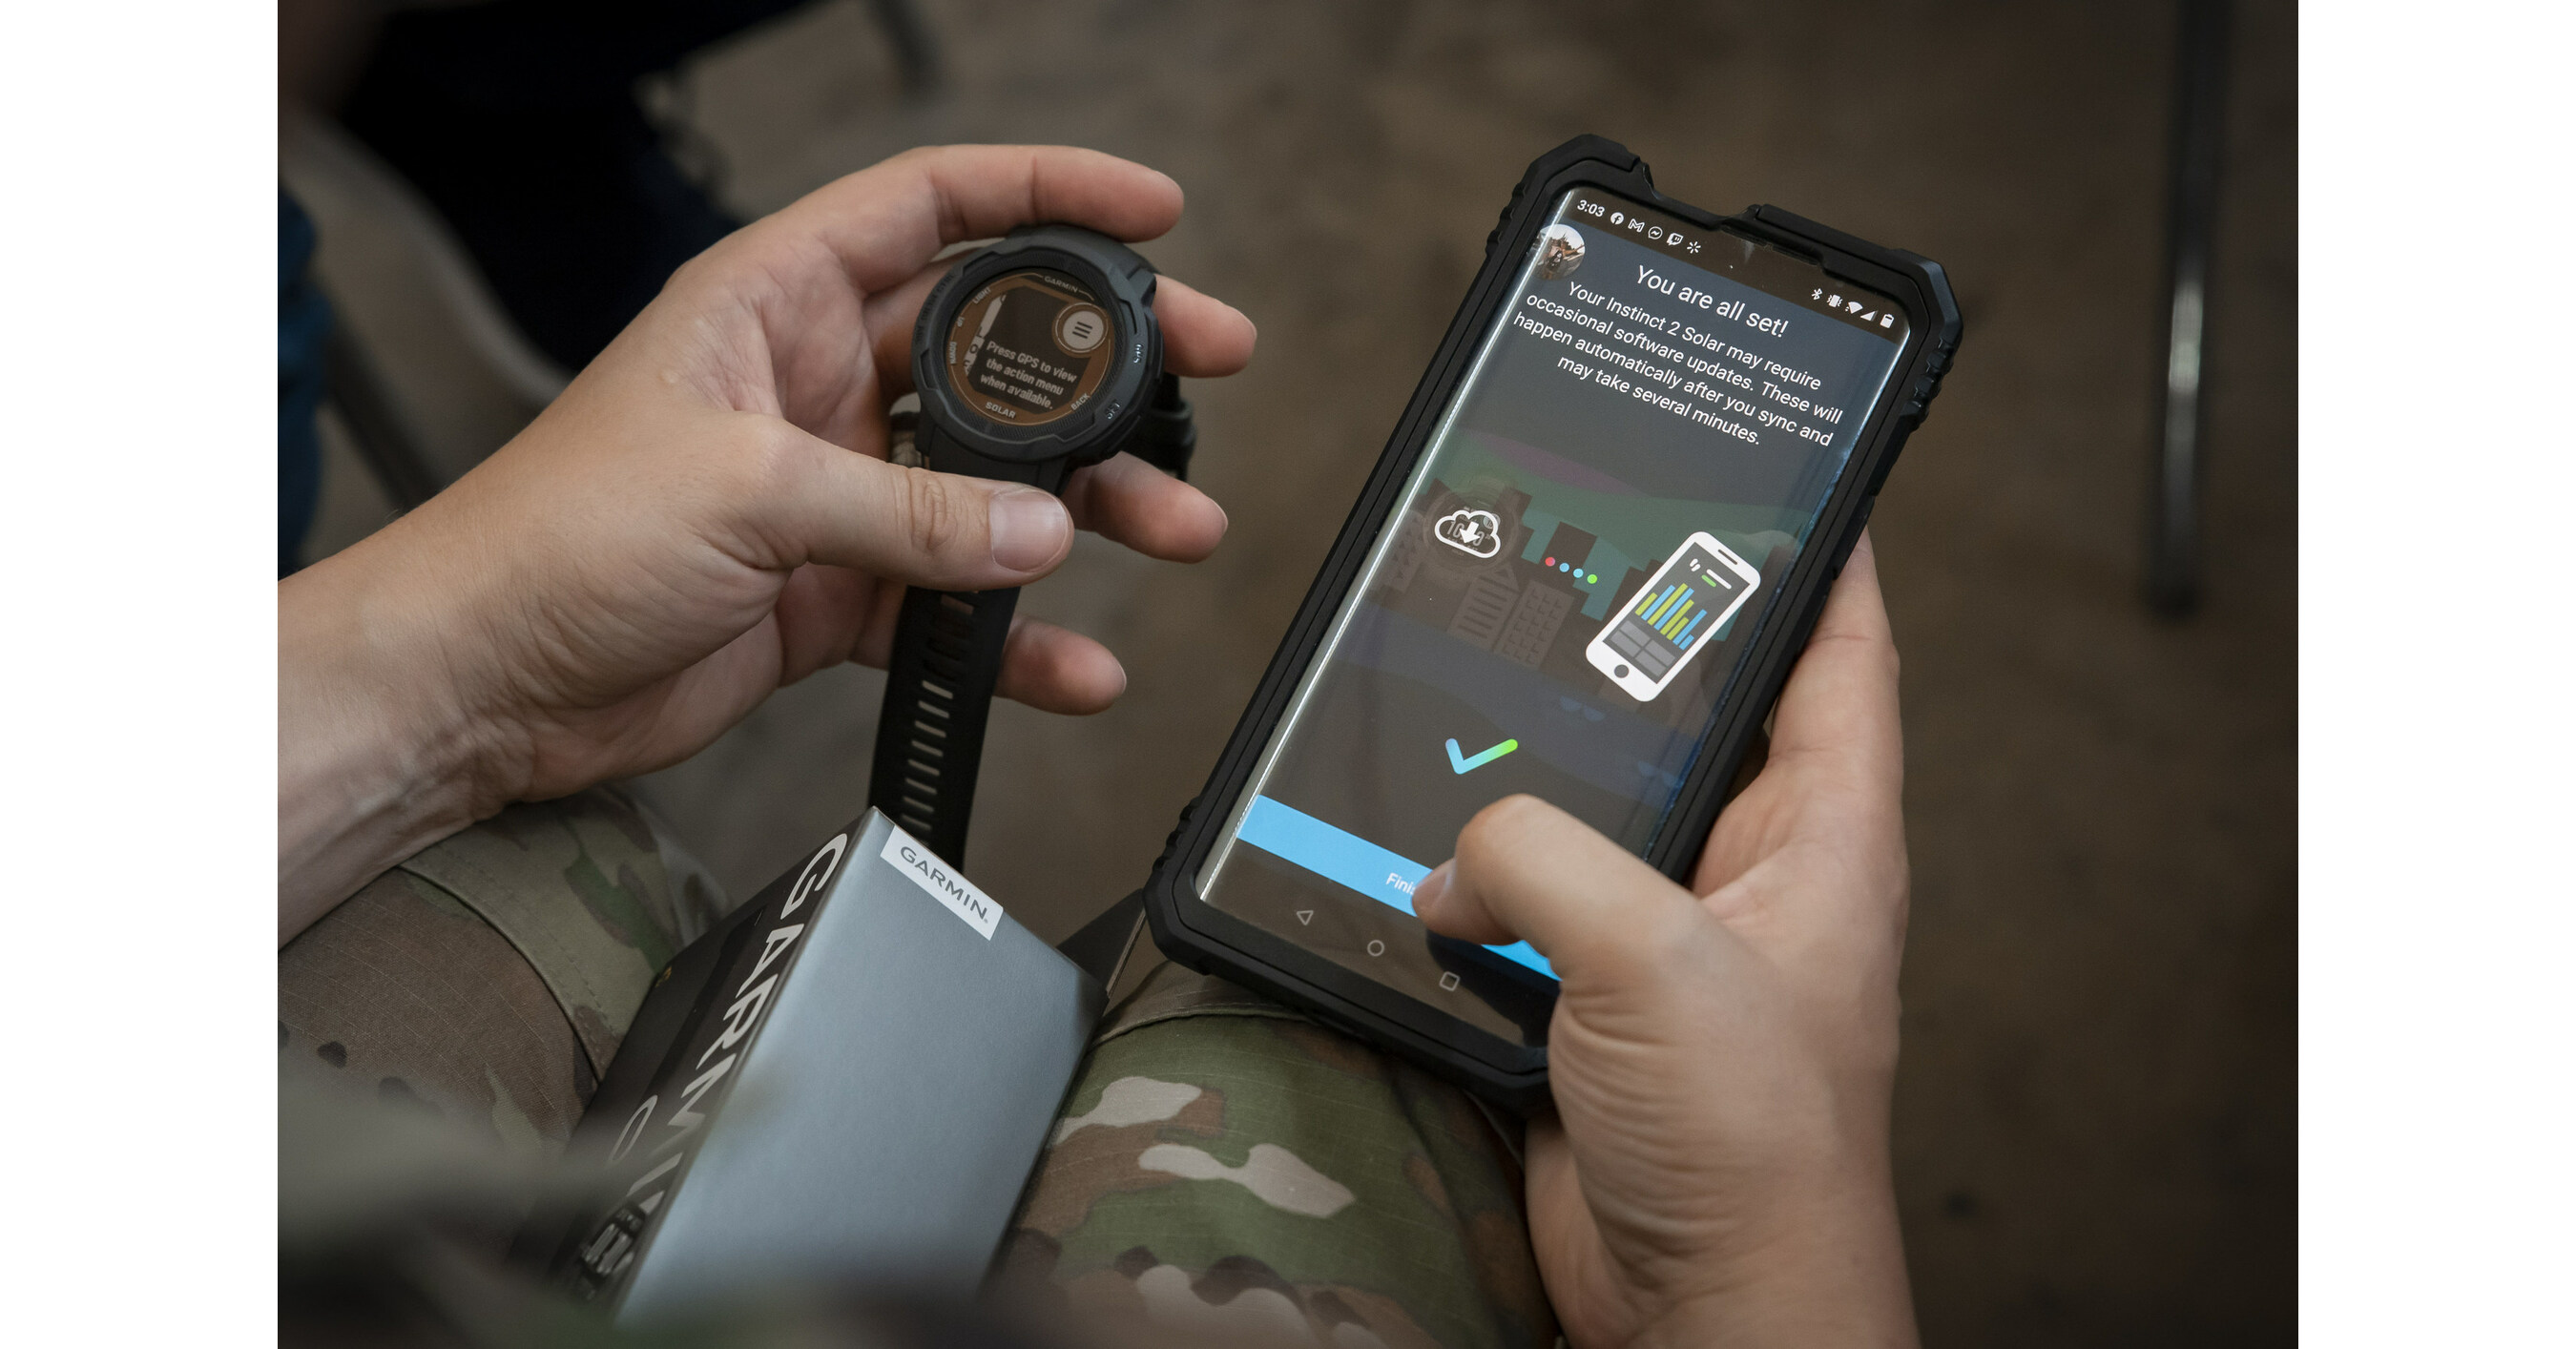 Garmin launches new connected scale that can give users trends over time